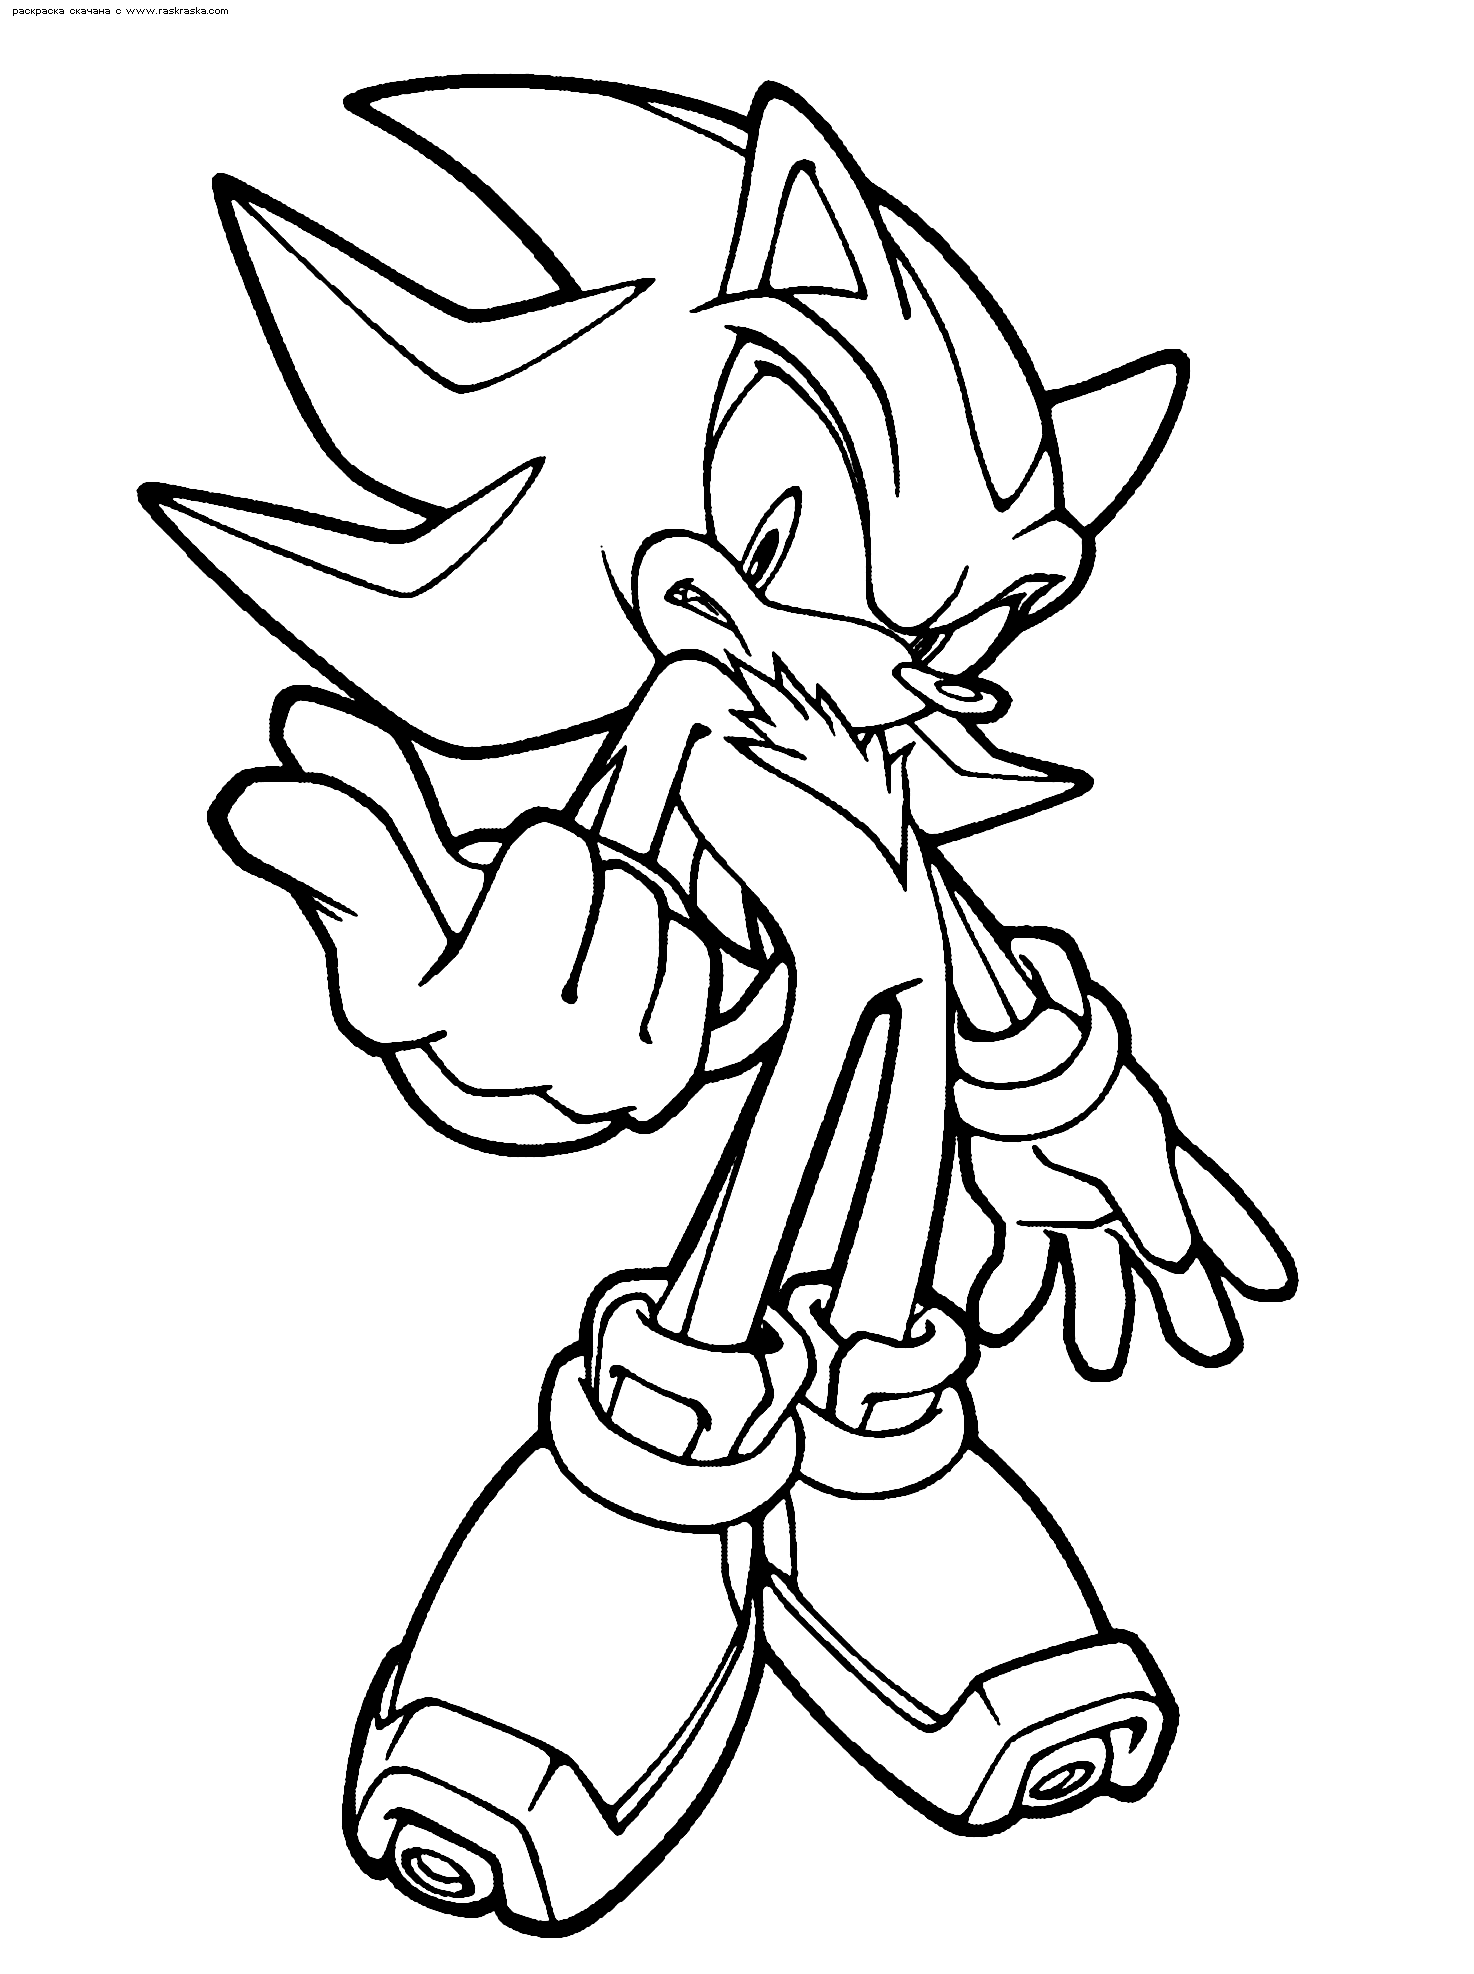 sonic coloring pages printable amazing coloring pages sonic printable coloring pages pages coloring printable sonic 